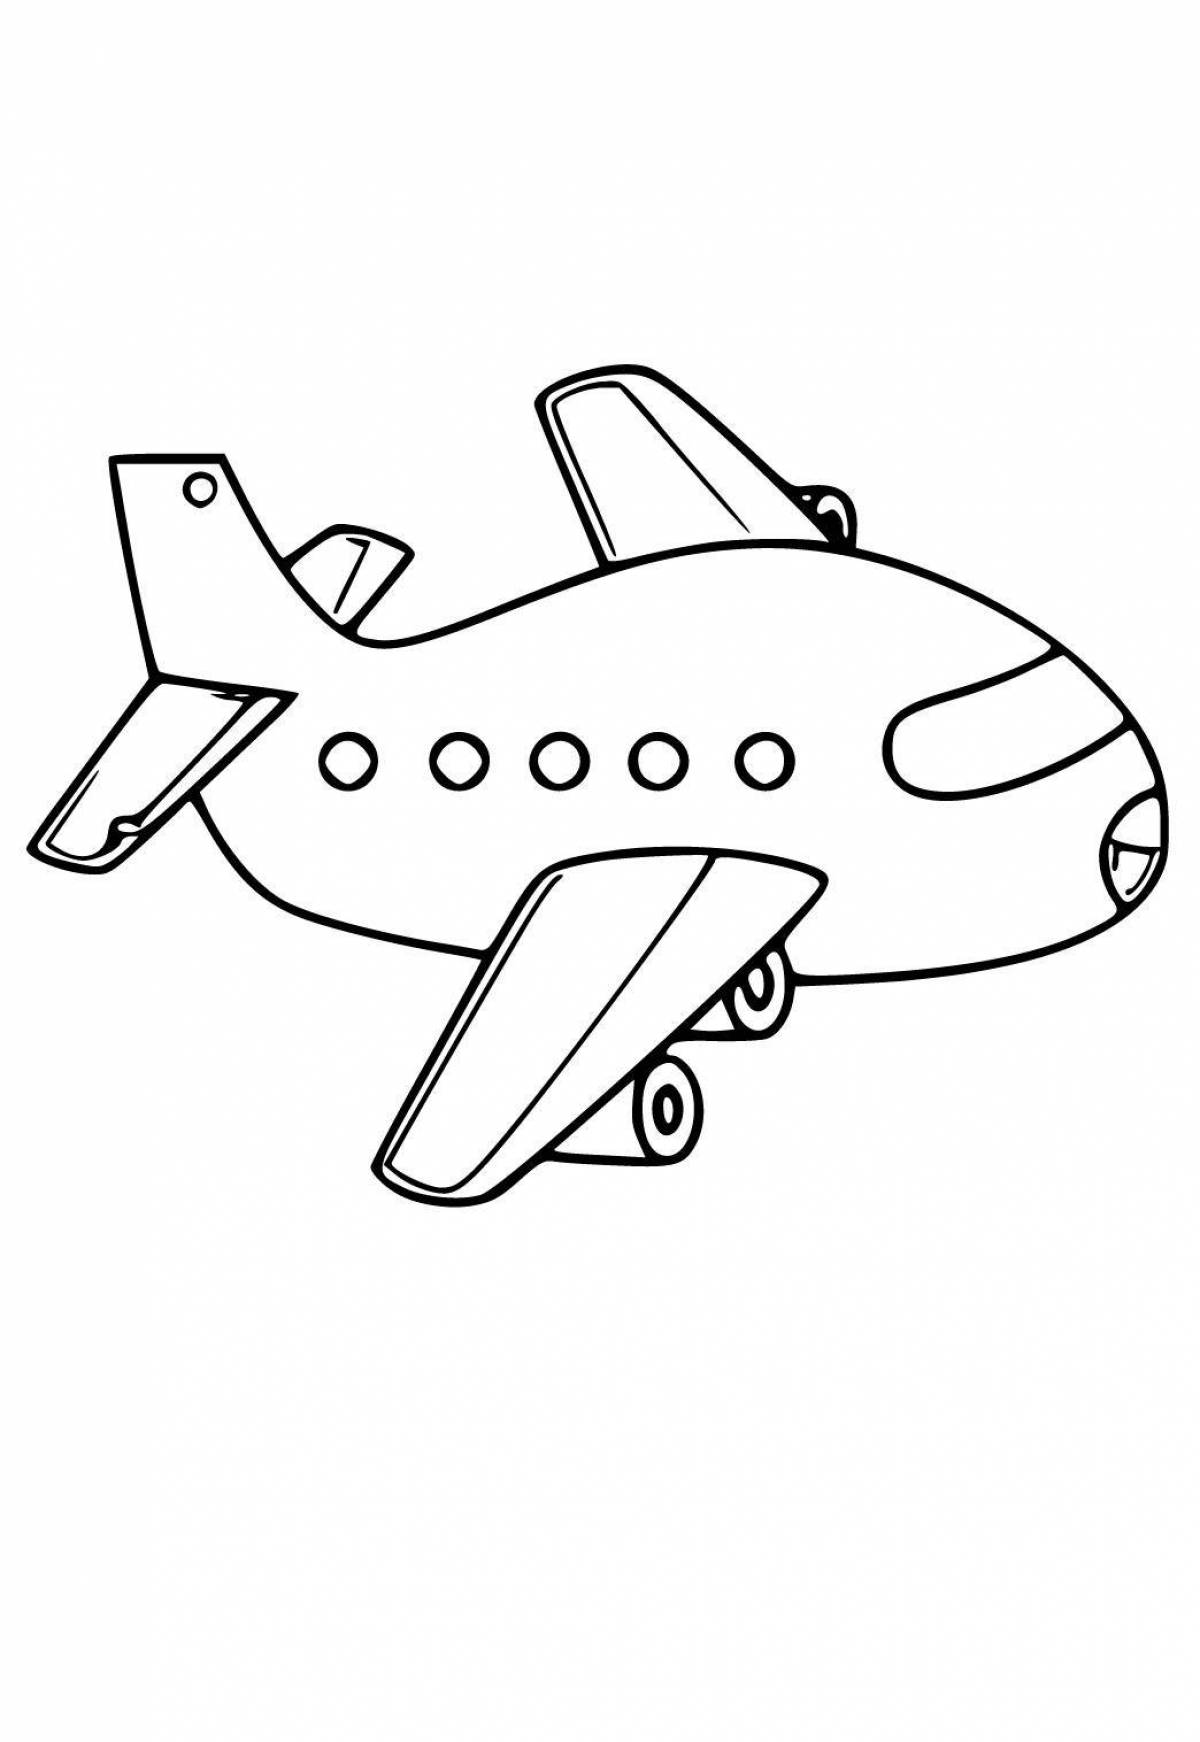 Fabulous war planes coloring pages for kids